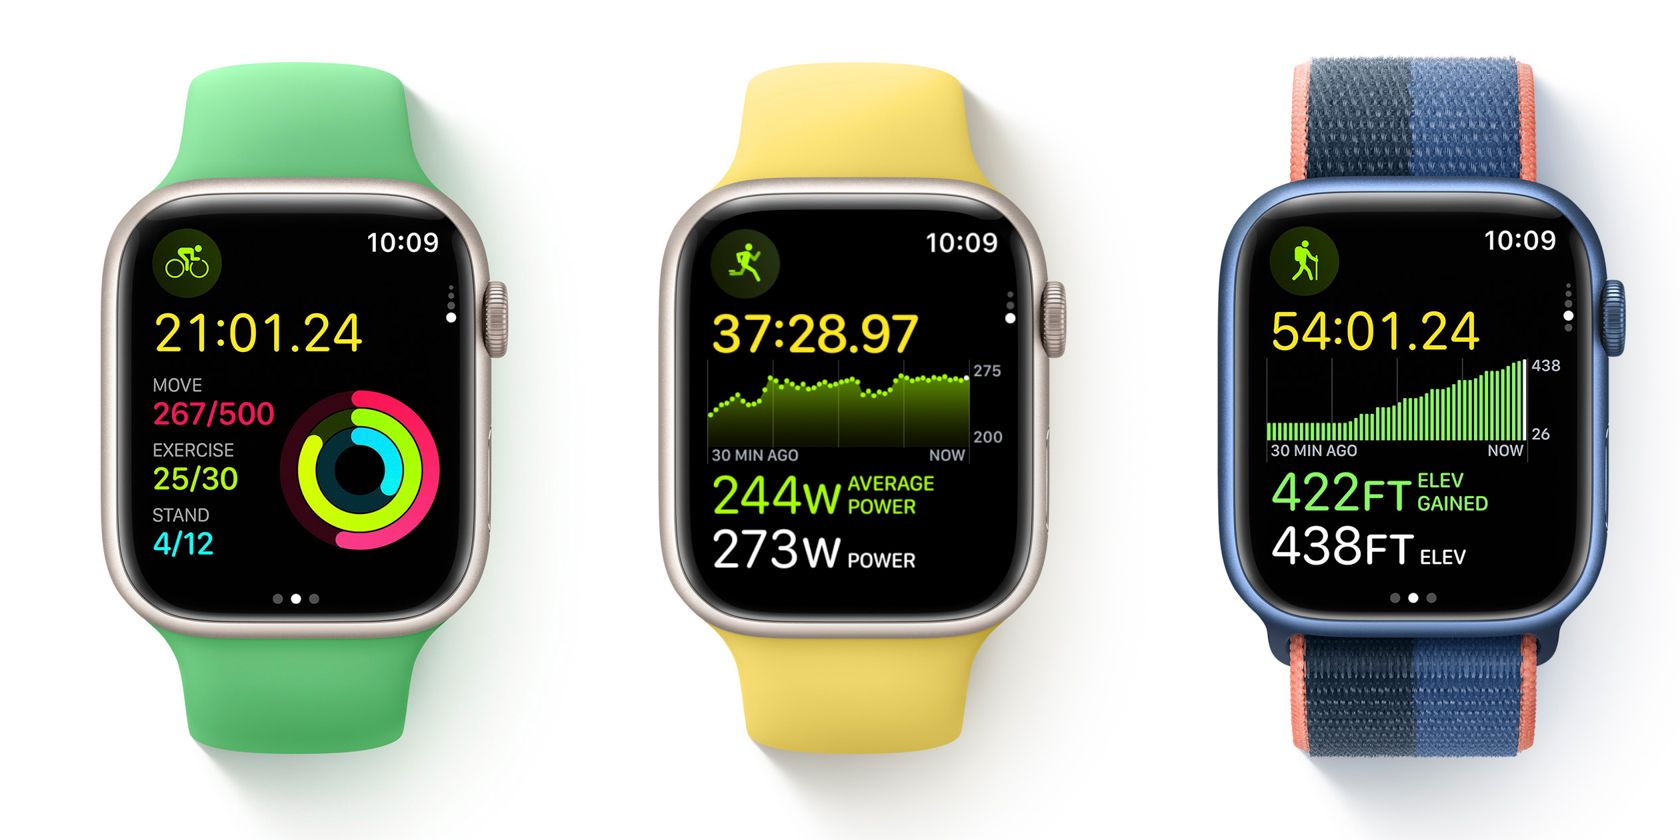 A row of Apple Watches showing different elements of the watch OS9 workout features